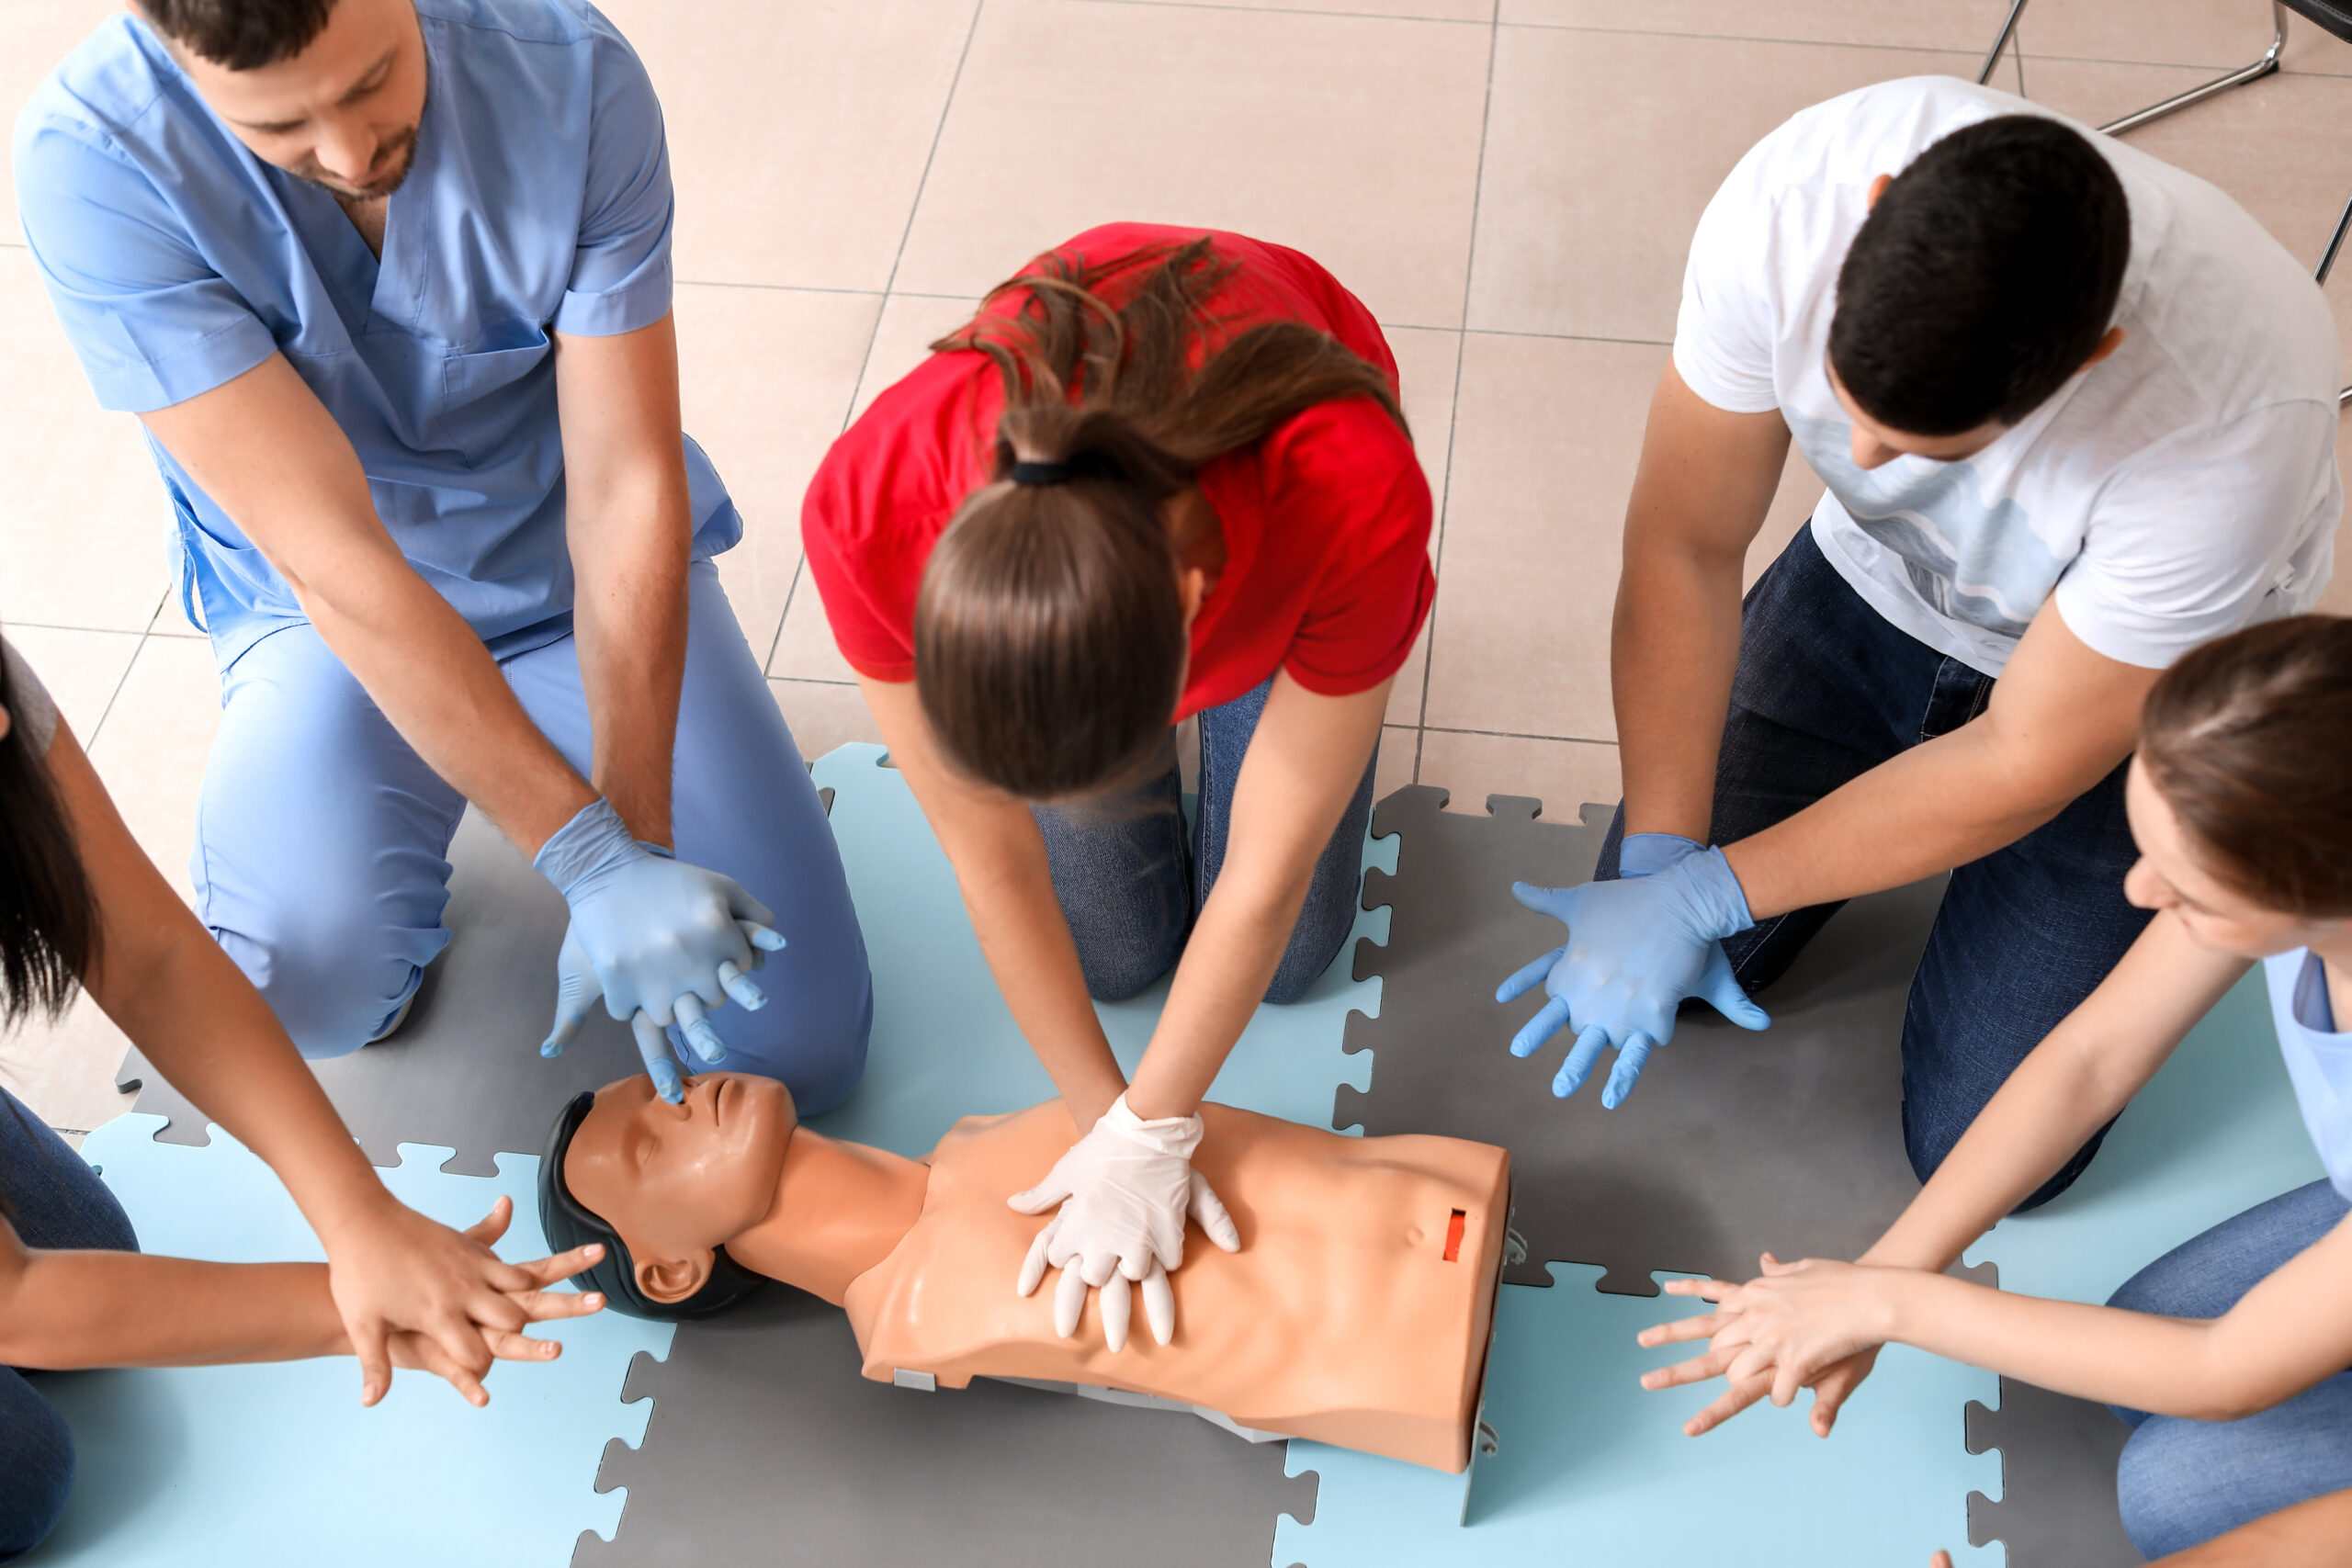 Instructors,Demonstrating,Cpr,On,Mannequin,At,First,Aid,Training,Course